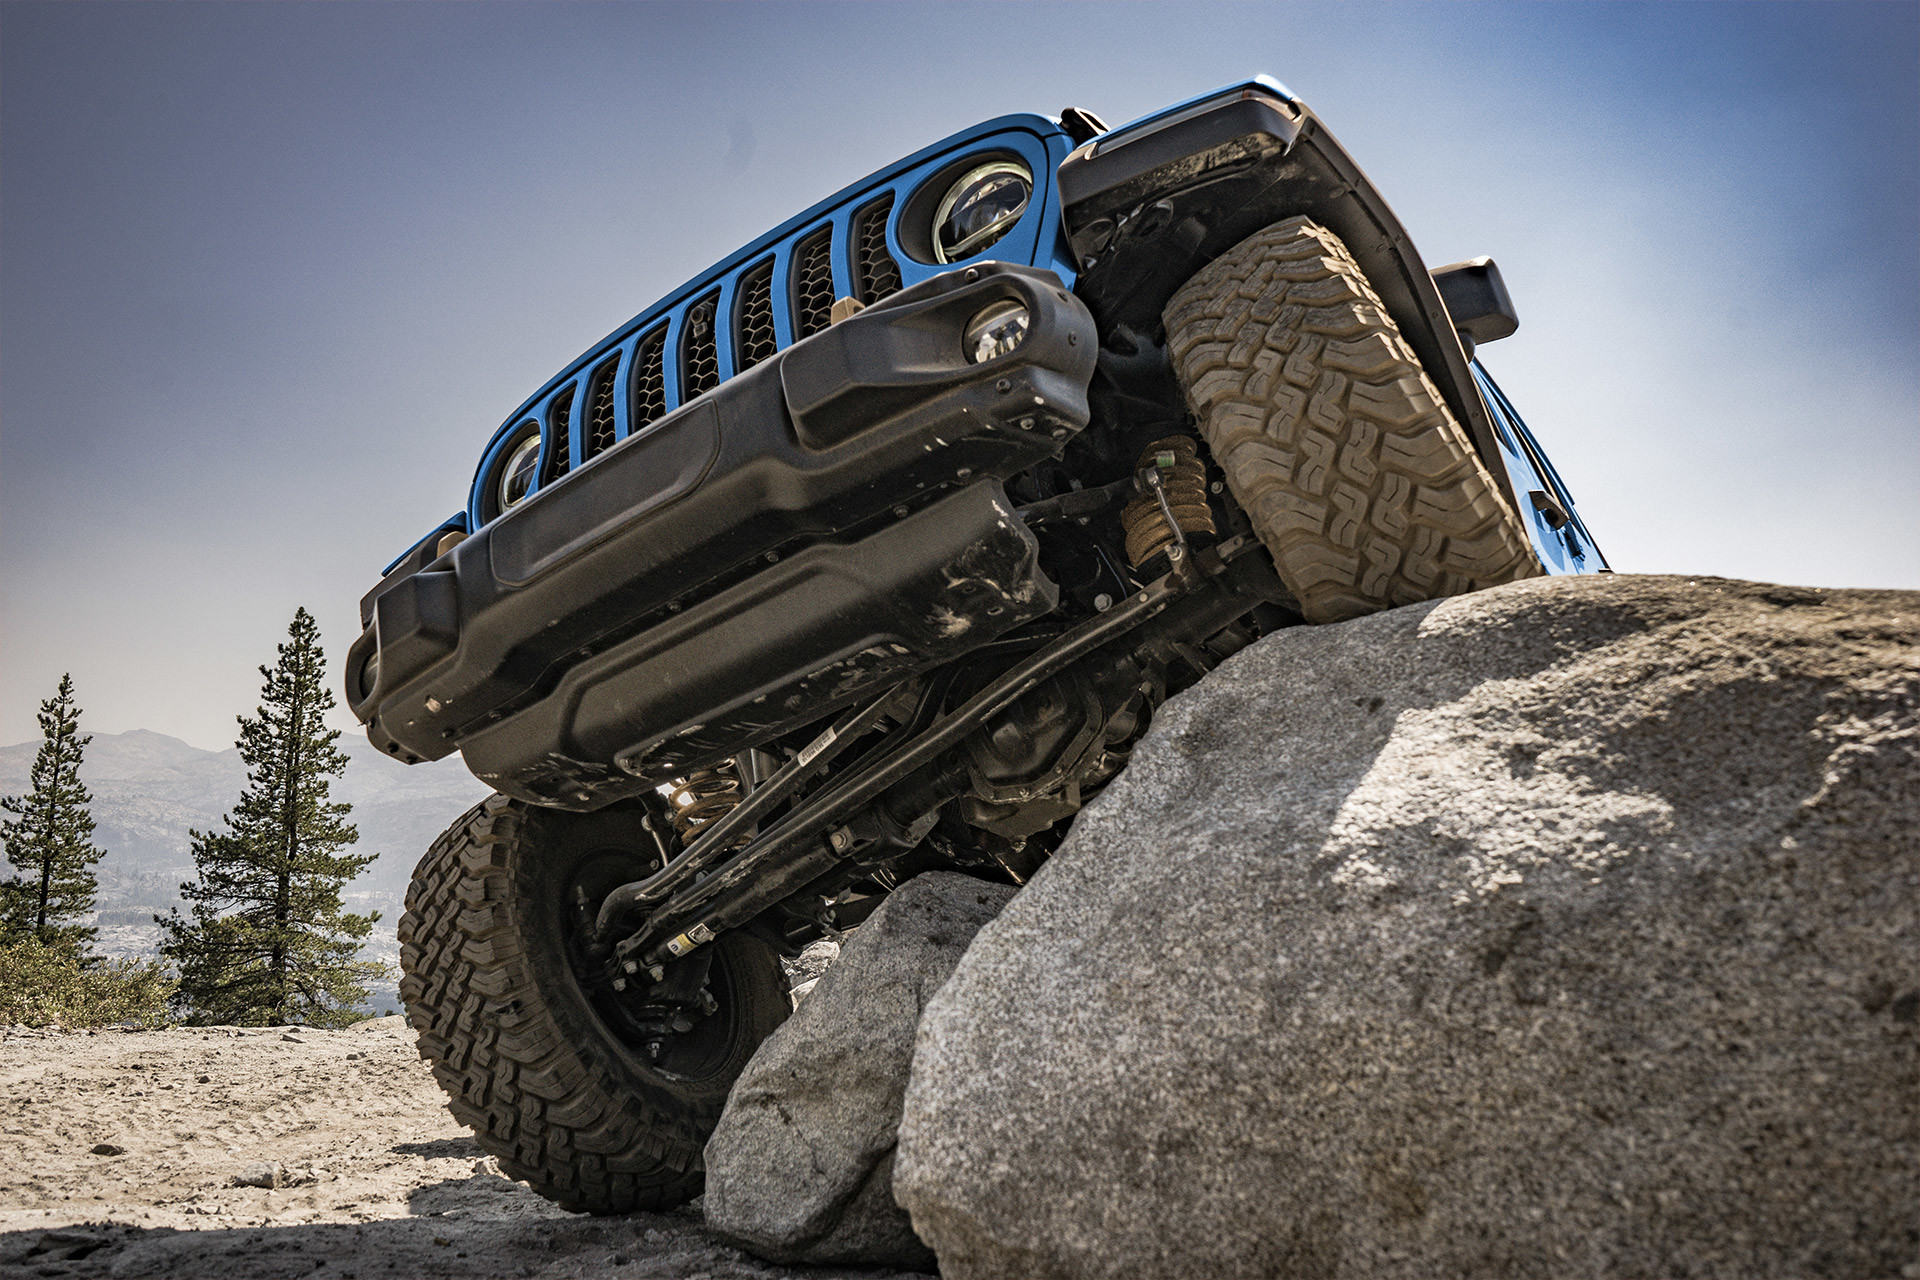 Jeep Wrangler Rubicon 392 with 4x4 capabilities driving over rocks